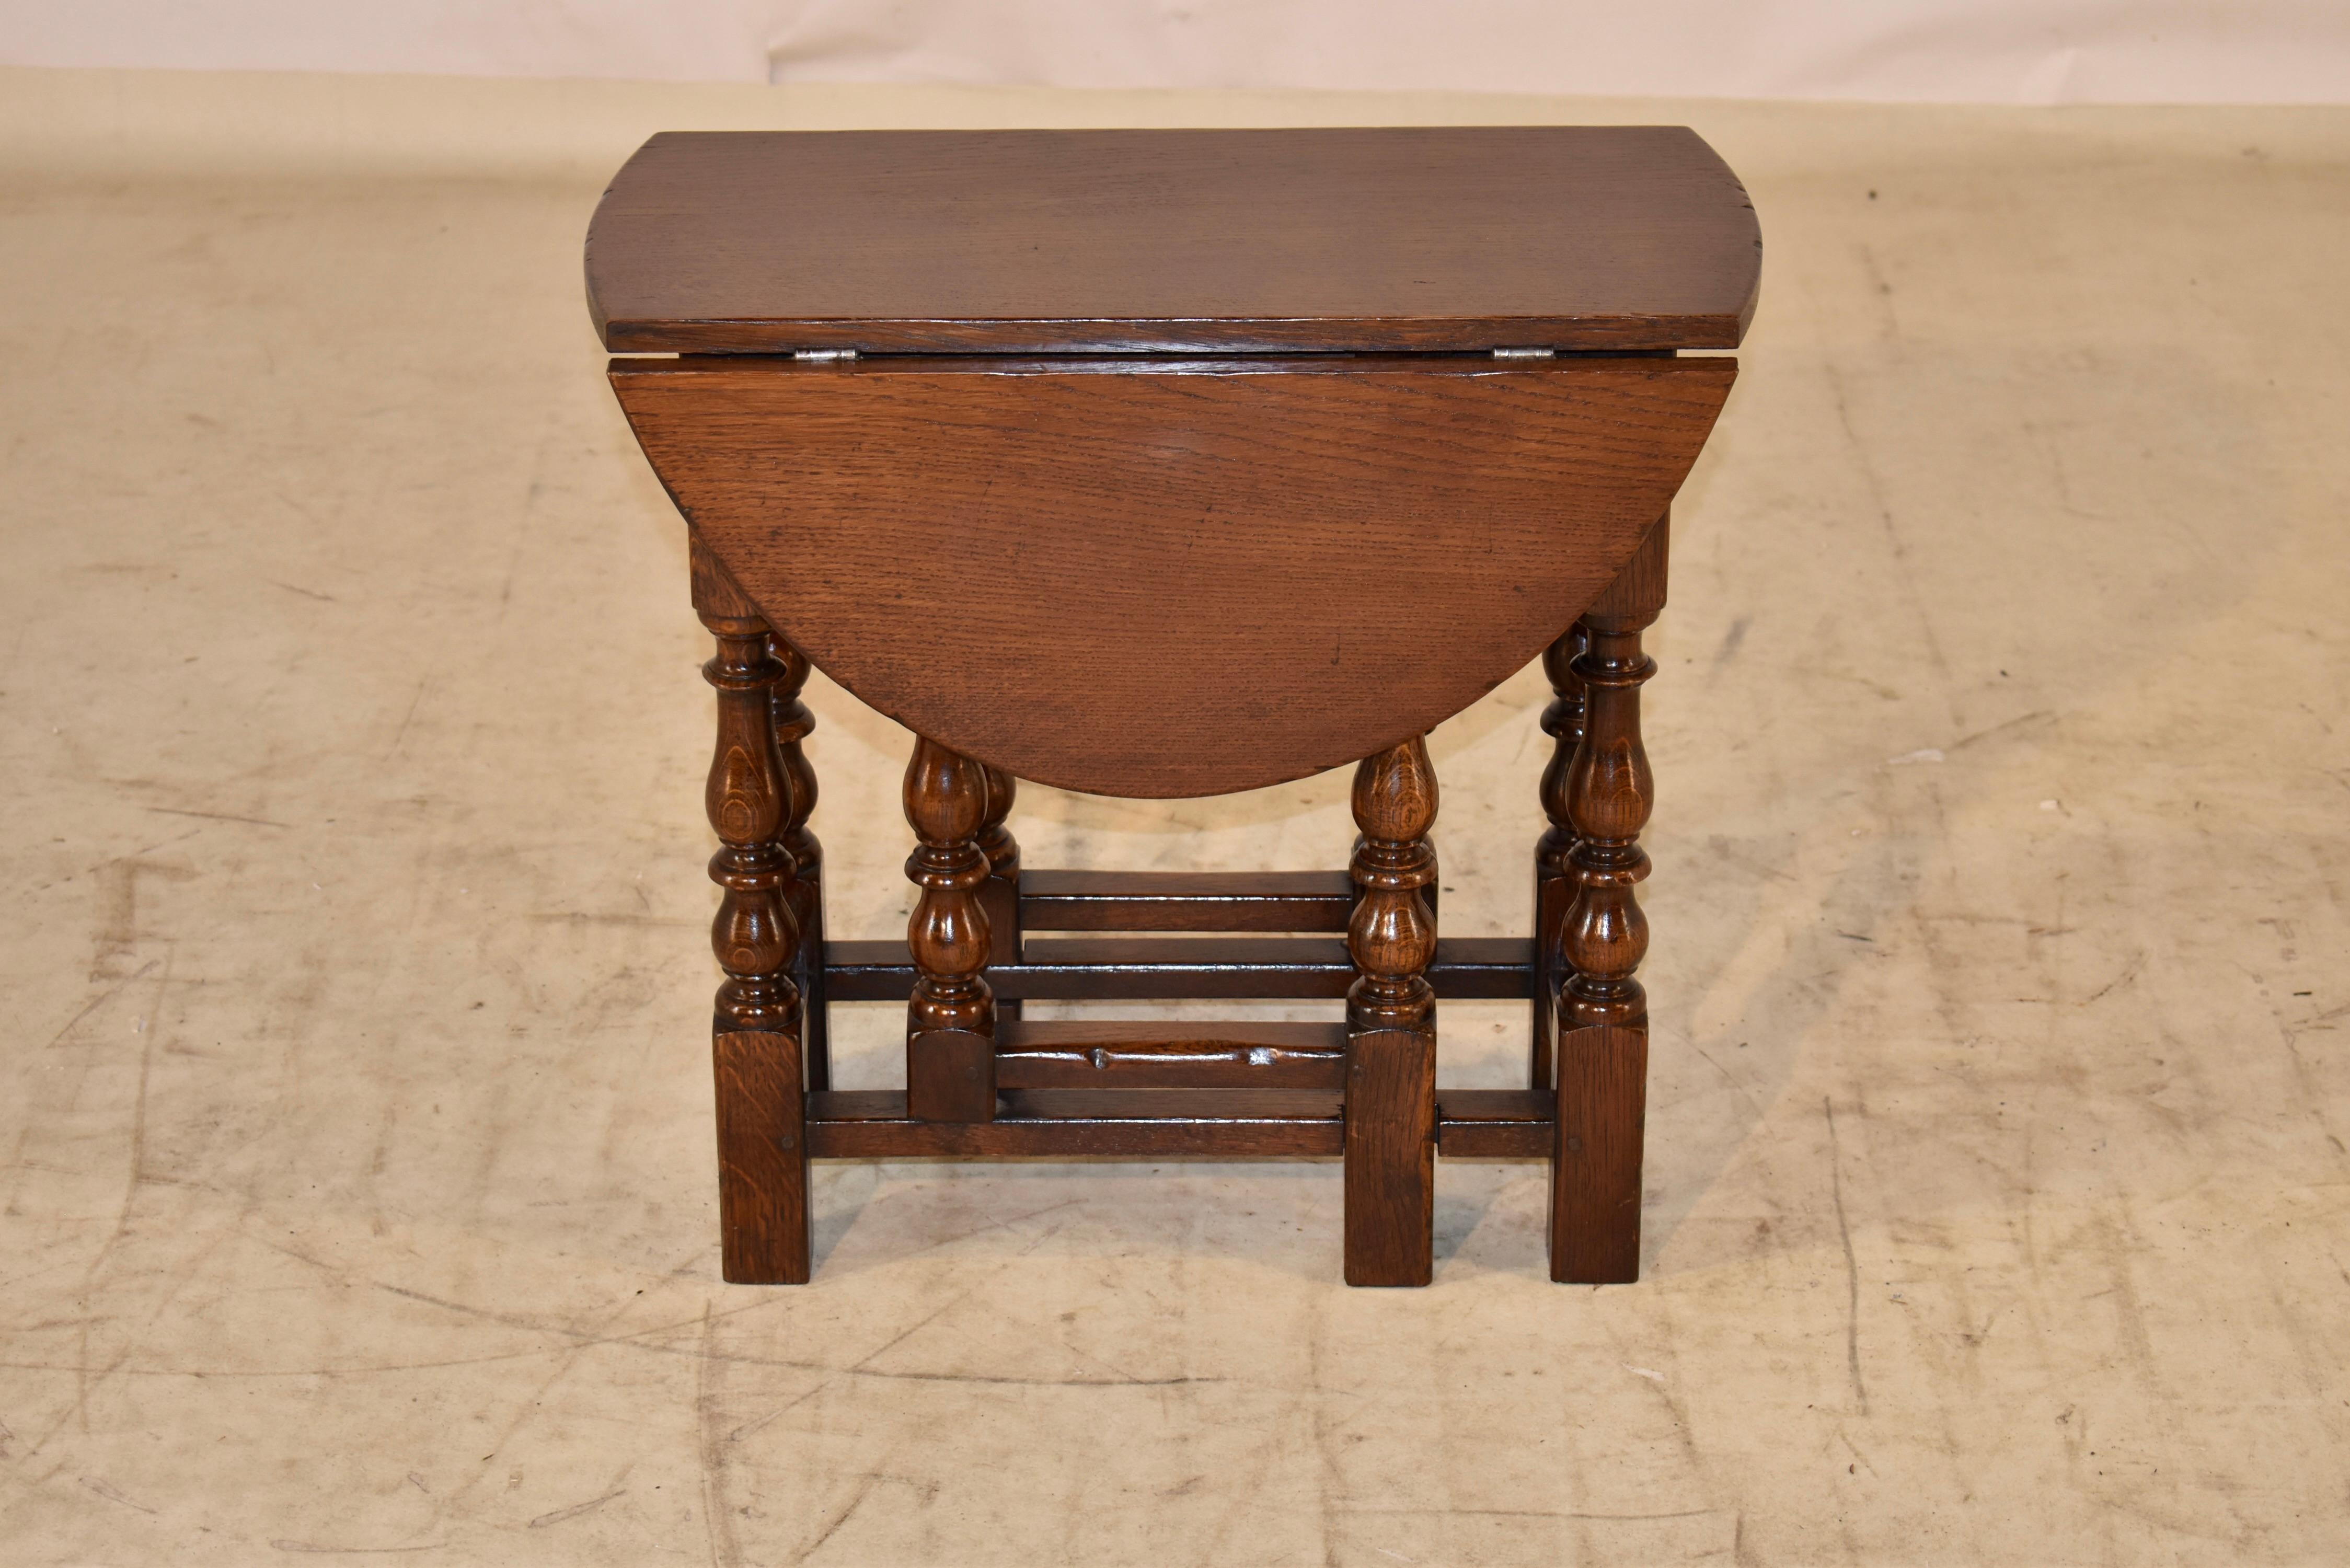 circa 1900-1909 English gate leg side table. This period Edwardian table has lovely graining on the top, following down to simple aprons, and supported on hand turned legs and gate legs. The legs are joined by simple stretchers. When the leaves are